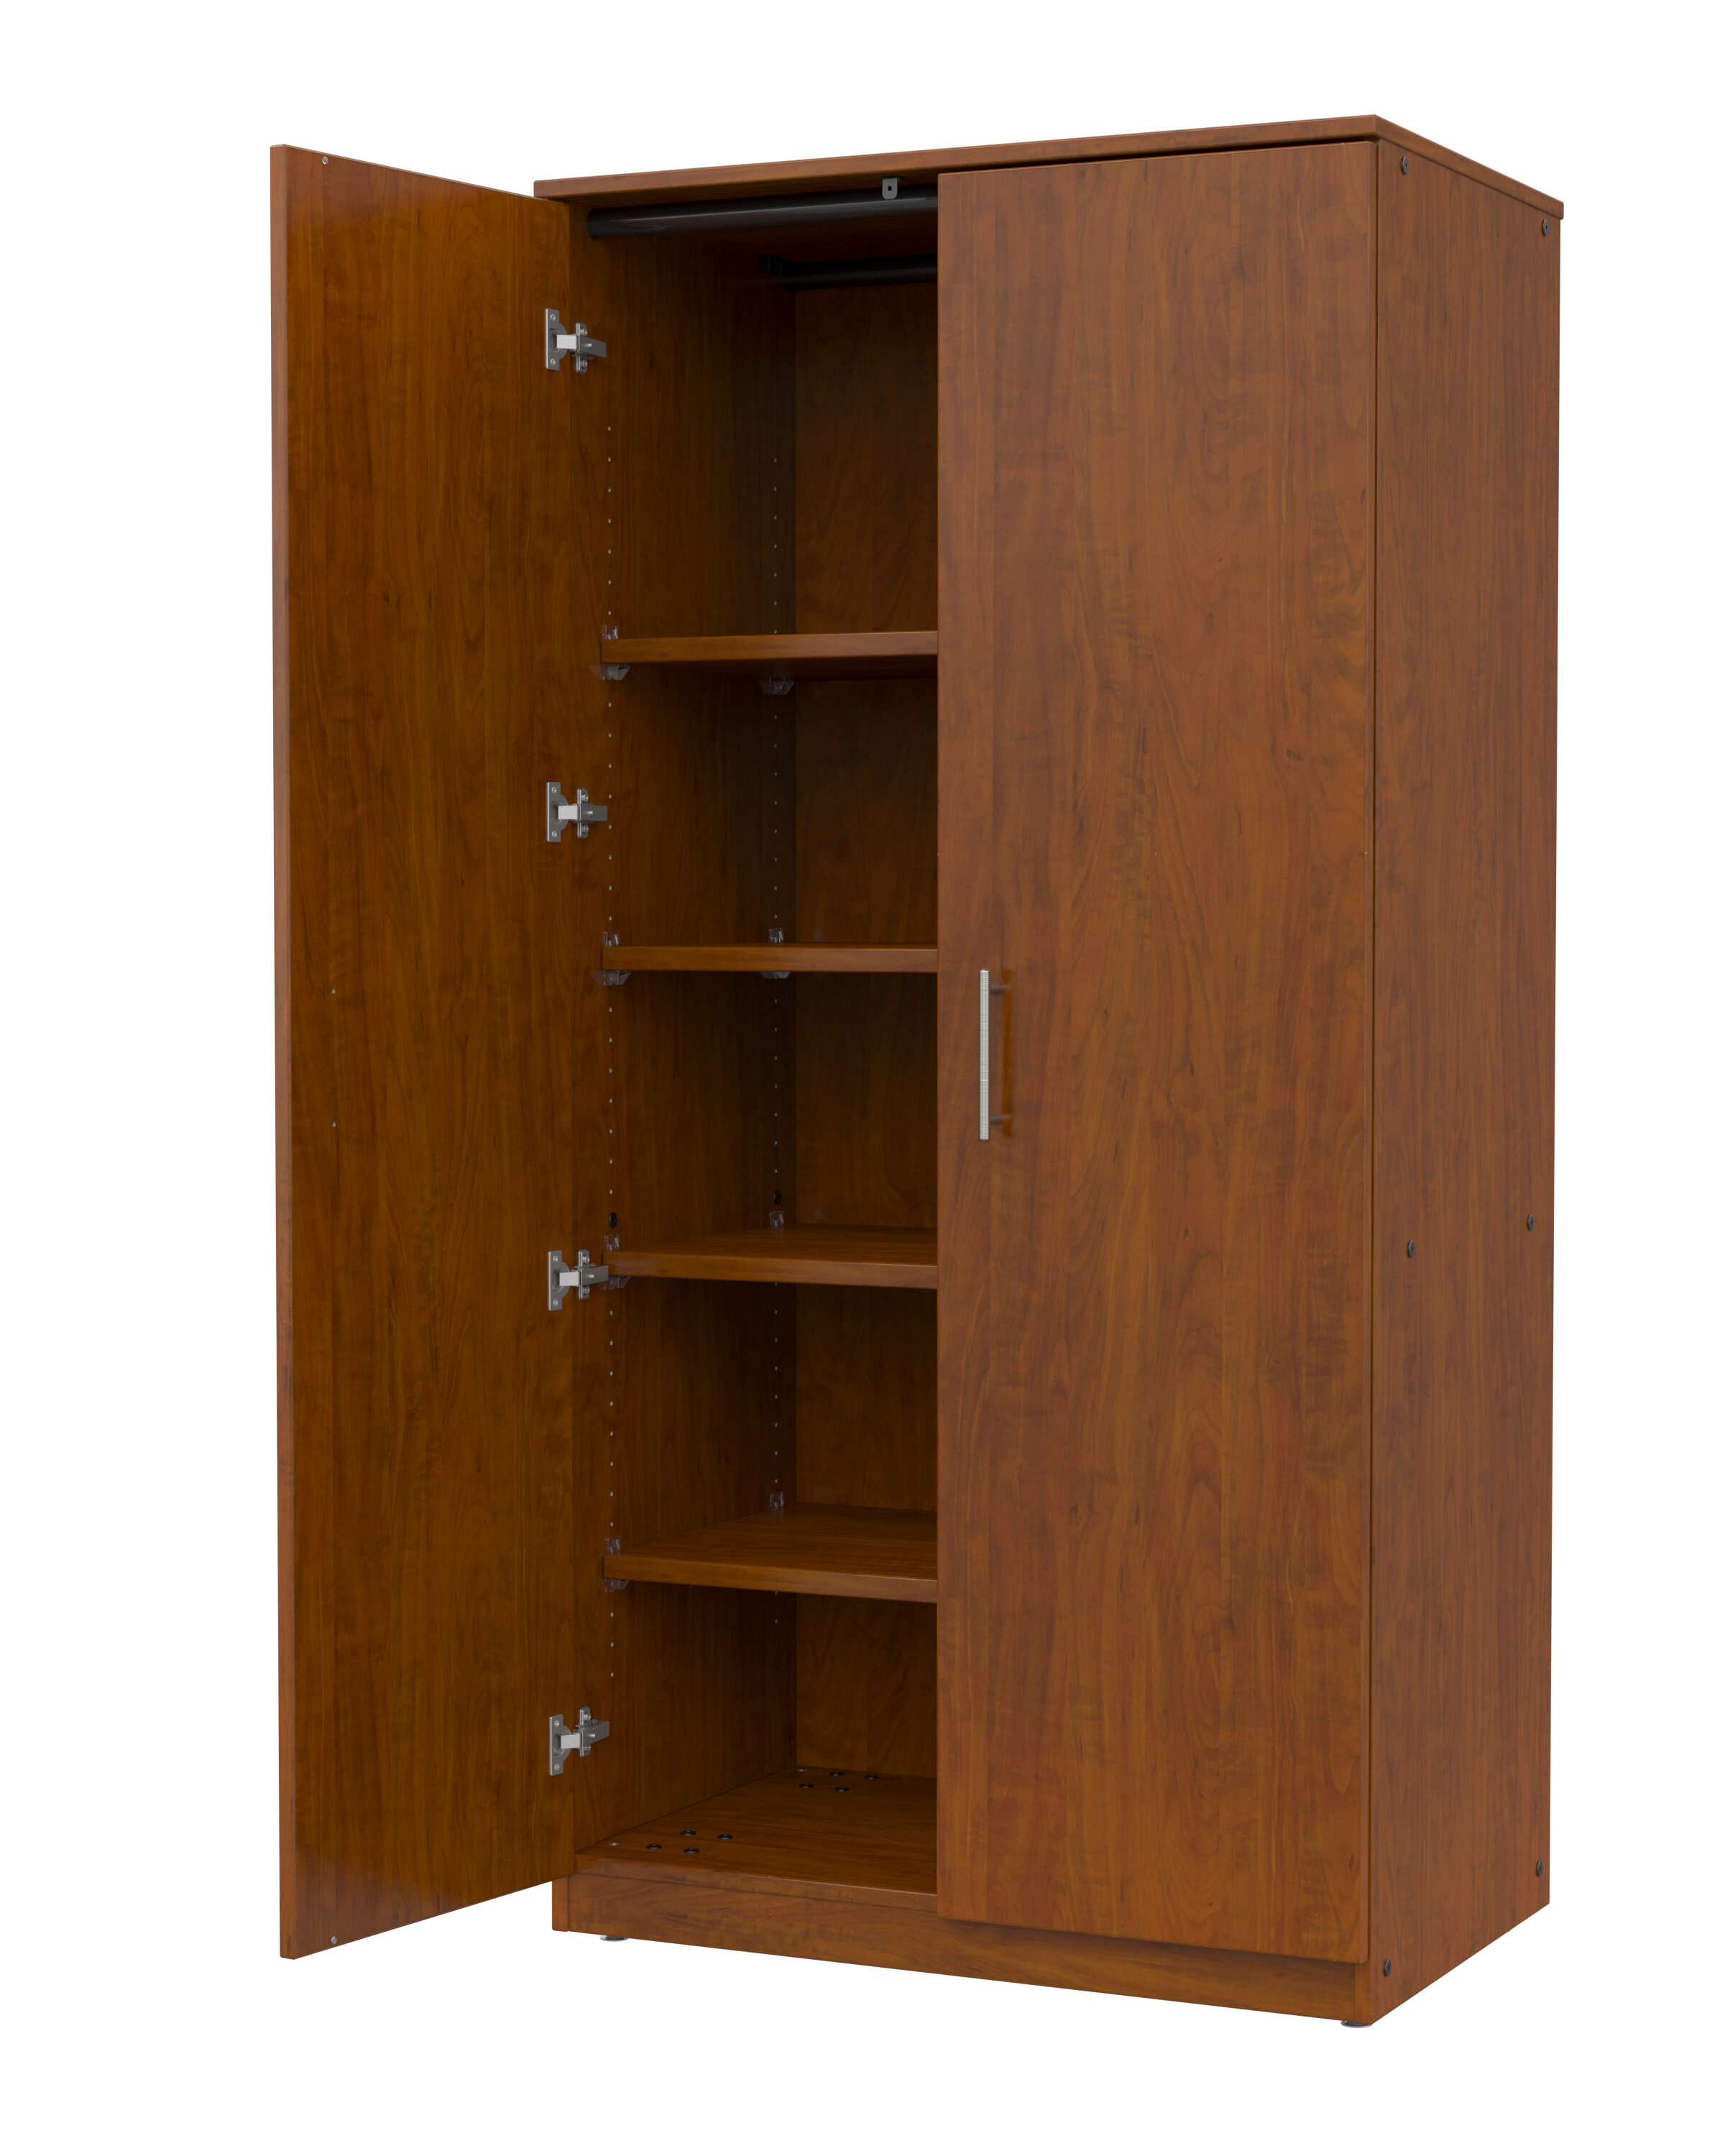 Tall Wood Storage Cabinets With Doors, Wooden Cabinet With Doors And Shelves